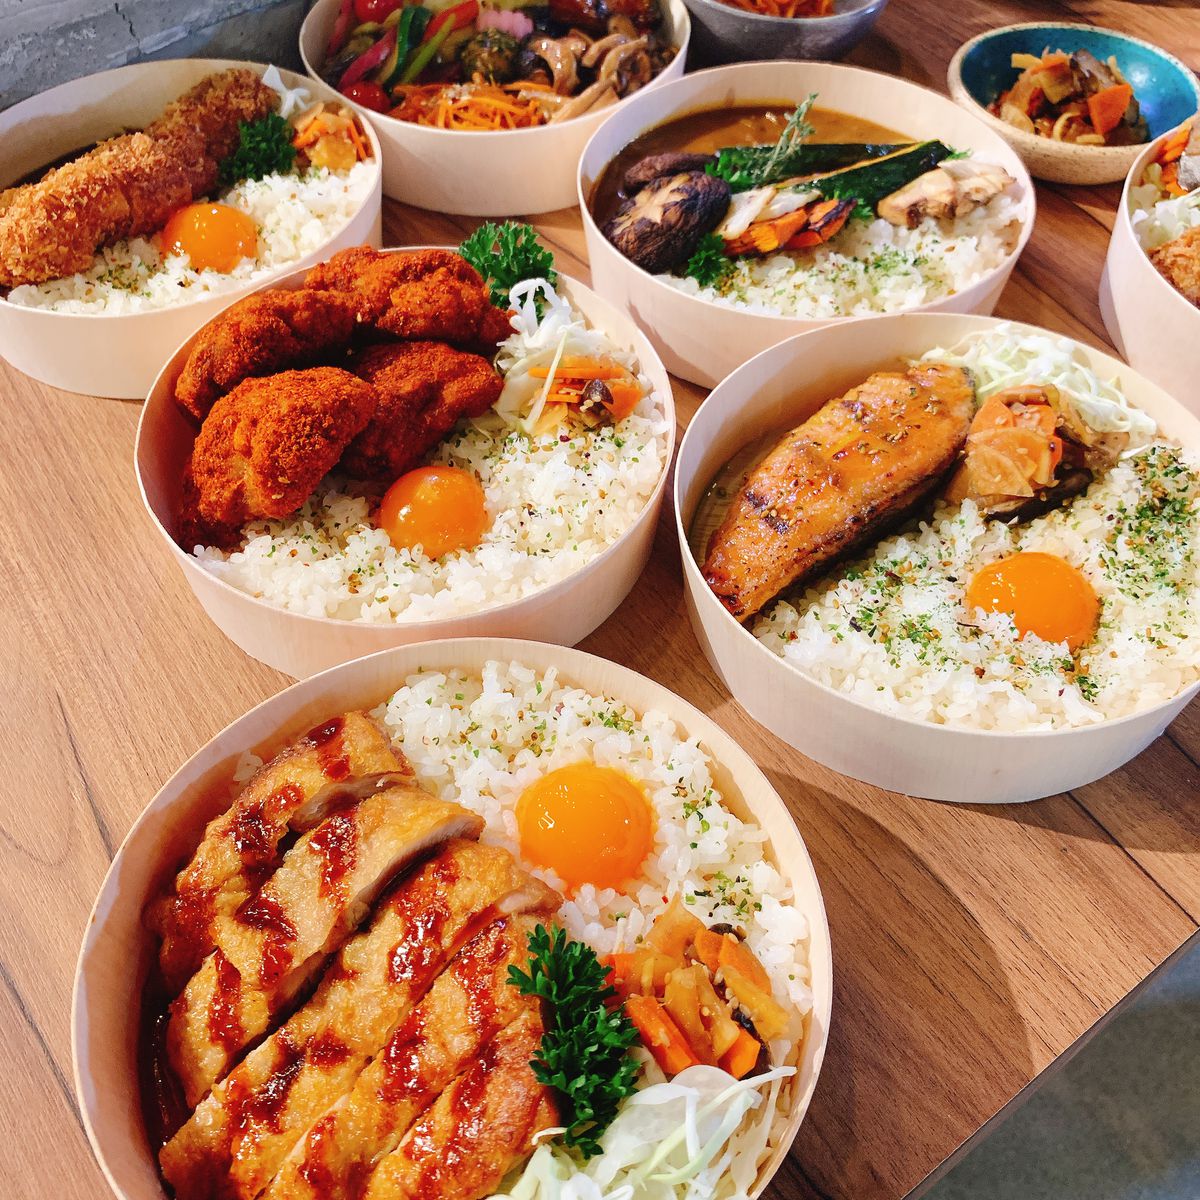 A variety of bento bowls with rice, egg yolks, fried chicken, and more.